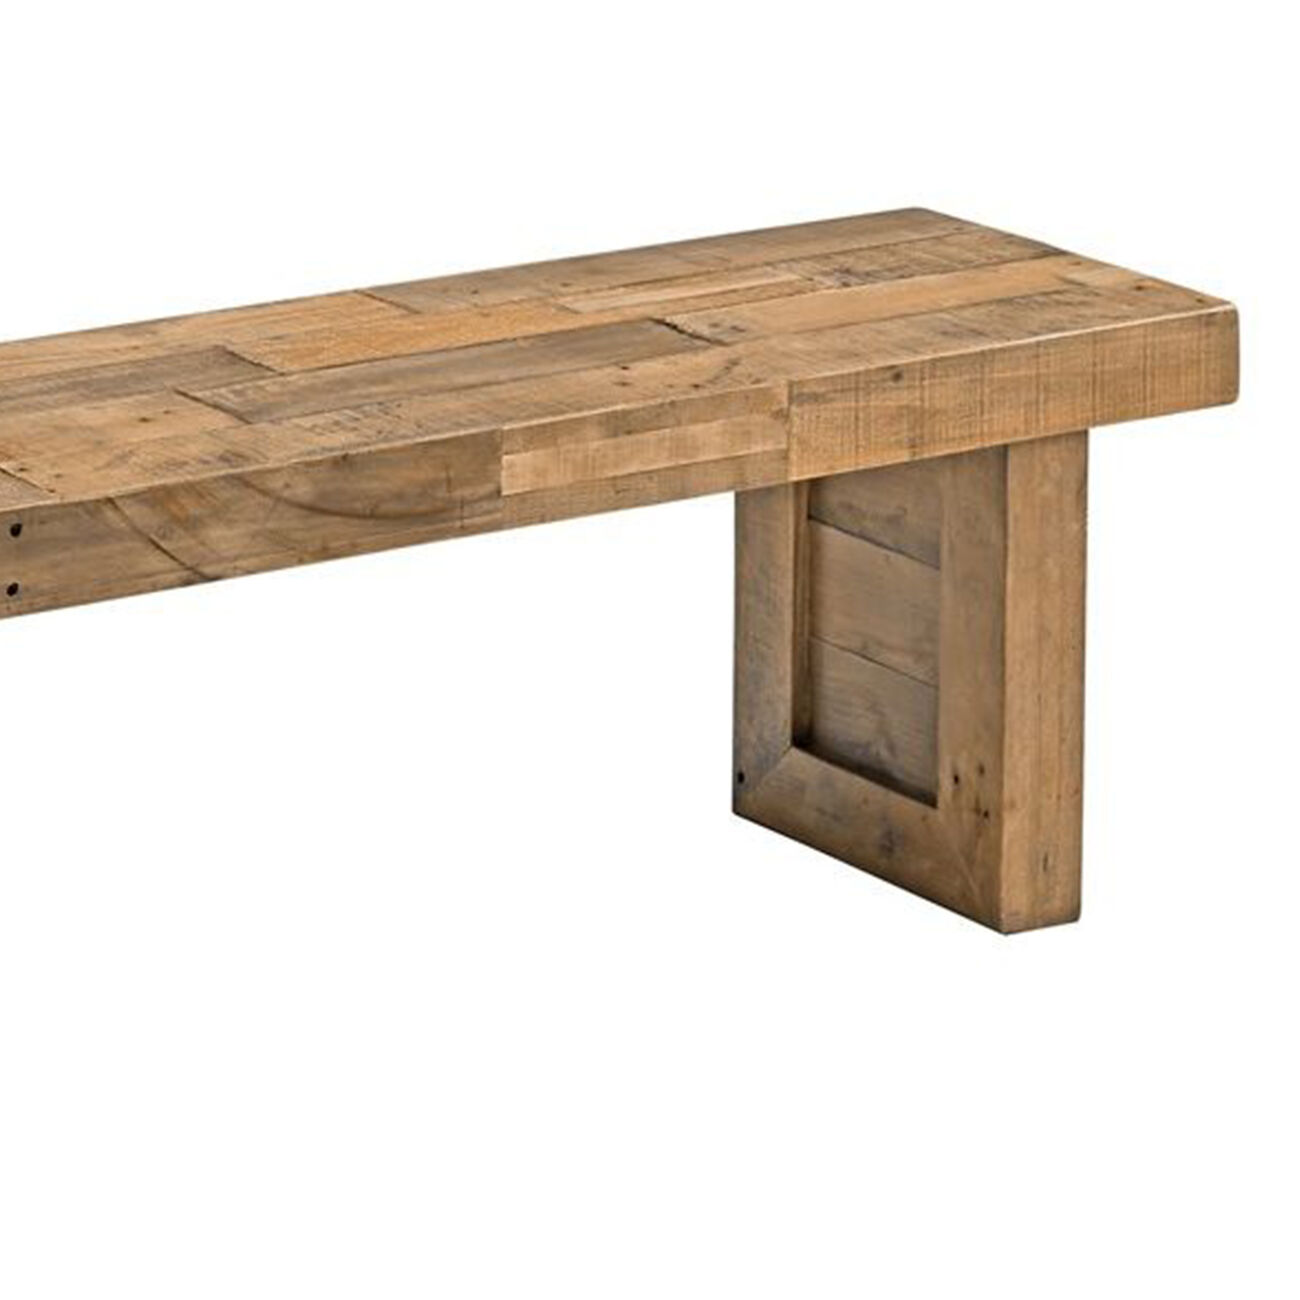 Rectangular Reclaimed Wood Bench with Sled Base, Distressed Brown